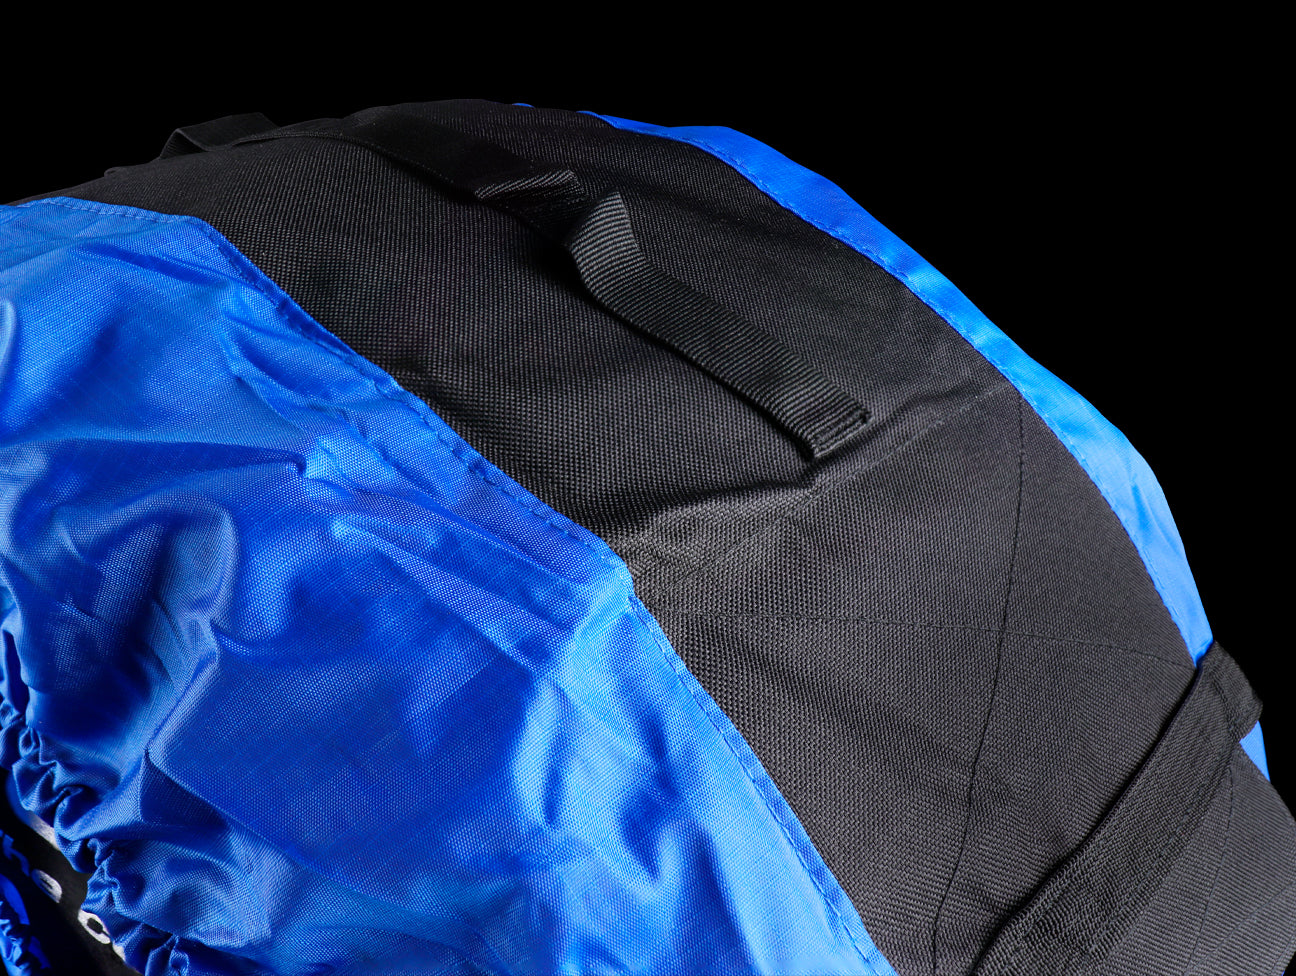 Large Tire Storage Bags